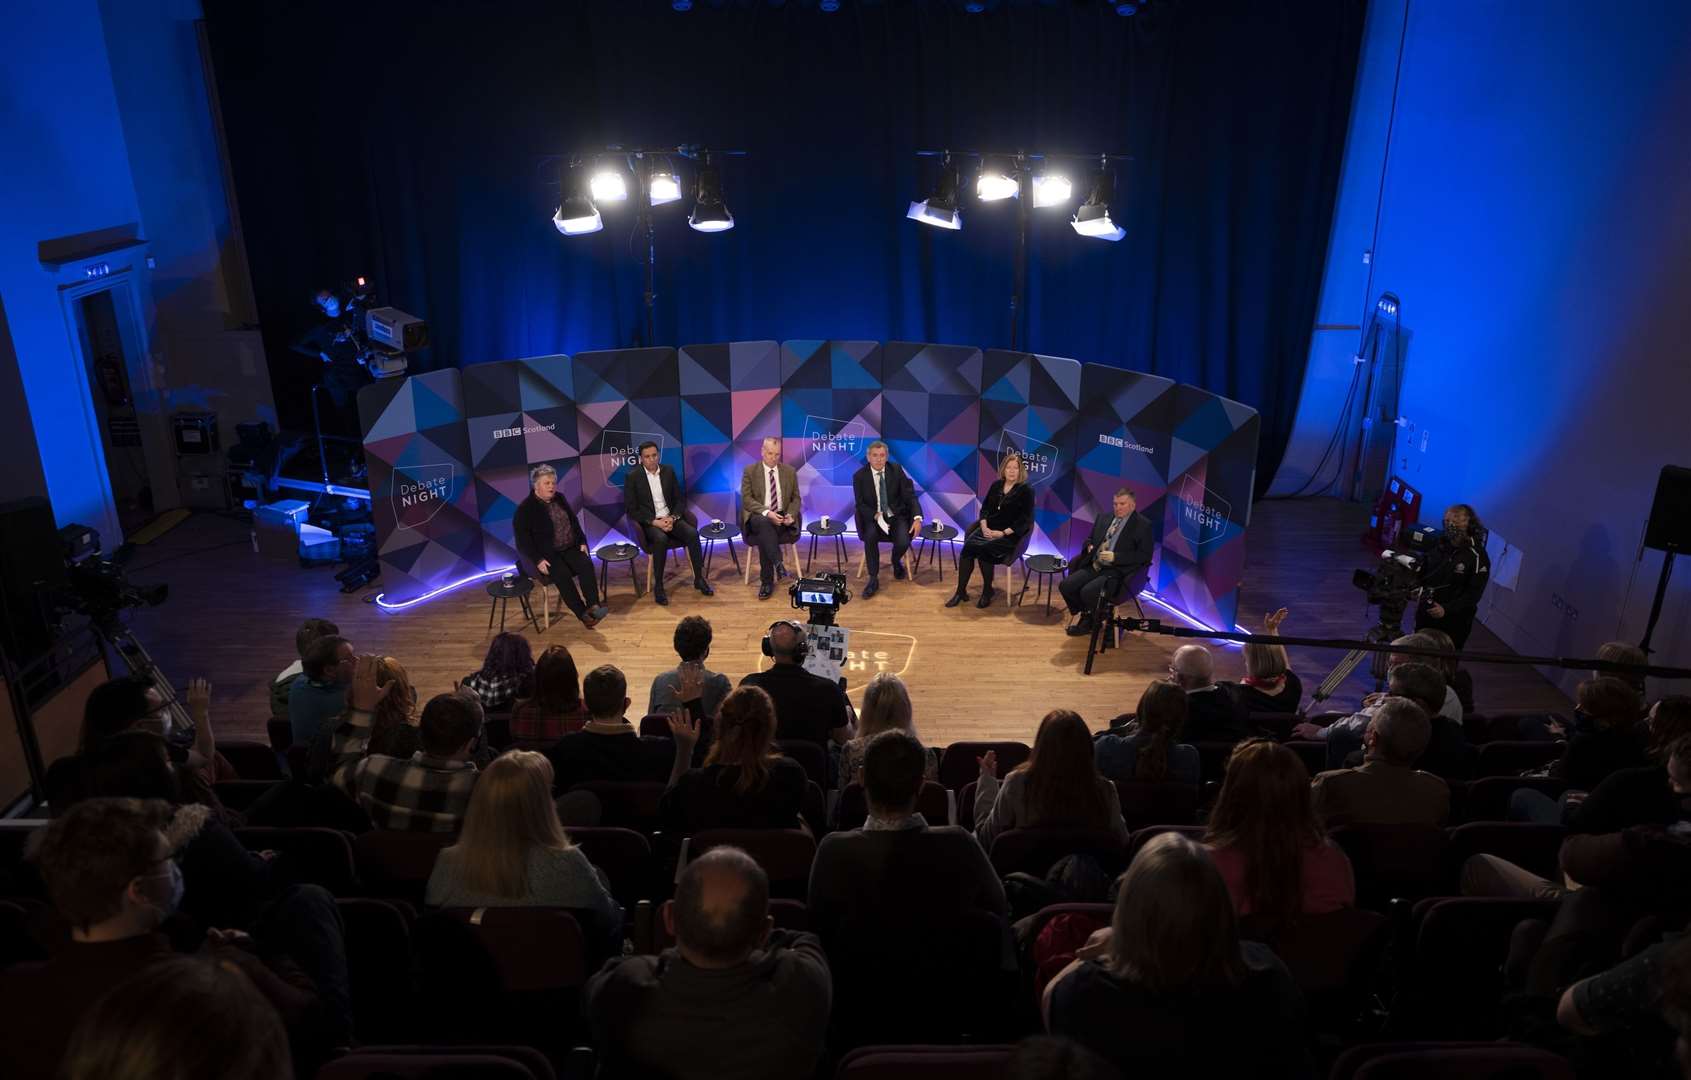 The BBC's political programme Debate Night is set to come to Elgin, with locals being invited to take their place in the crowd. Picture: BBC